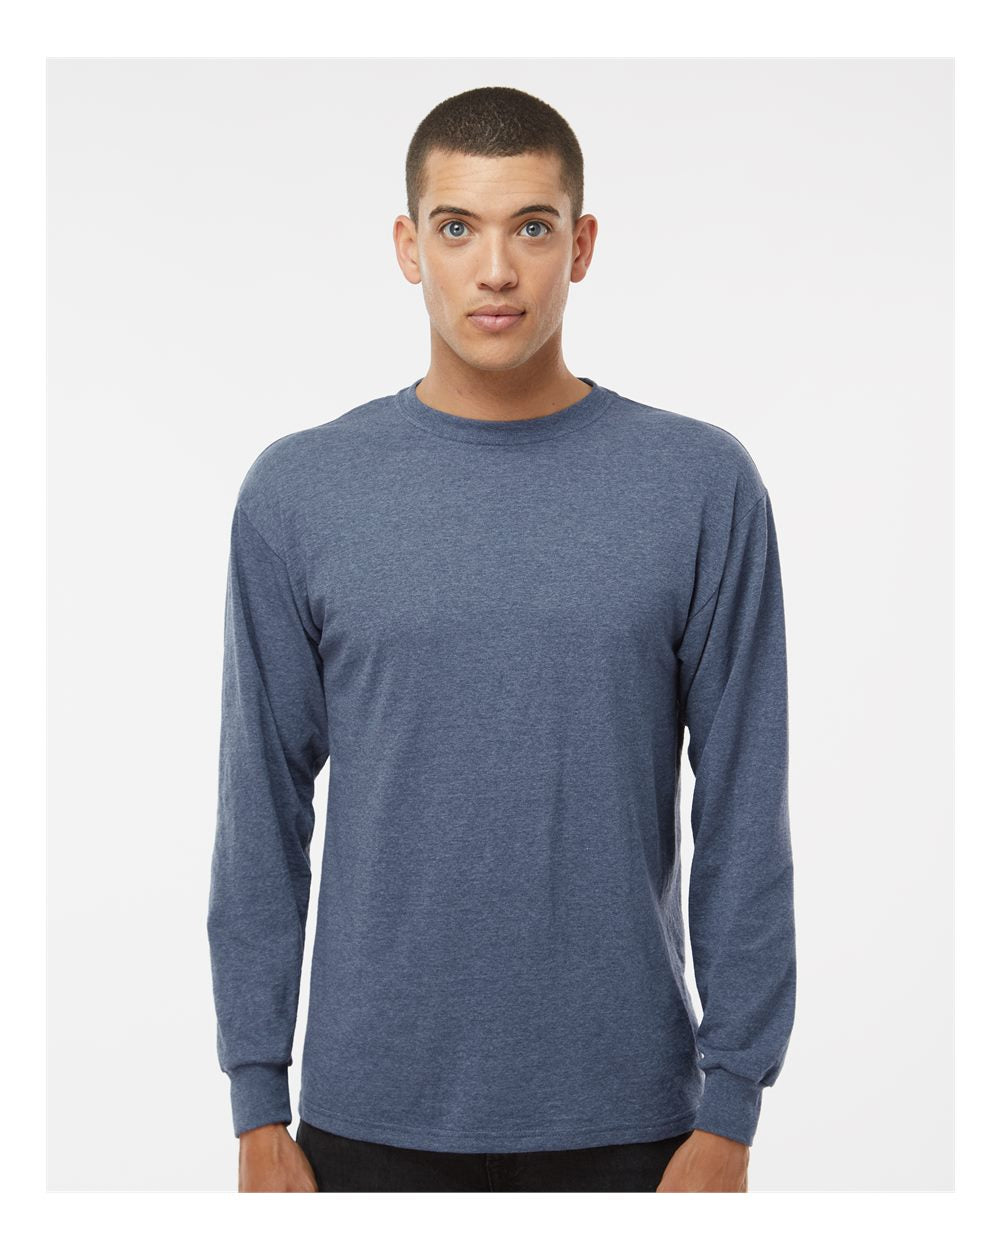 M&O Gold Soft Touch Long Sleeve T-Shirt 4820 #colormdl_Heather Navy